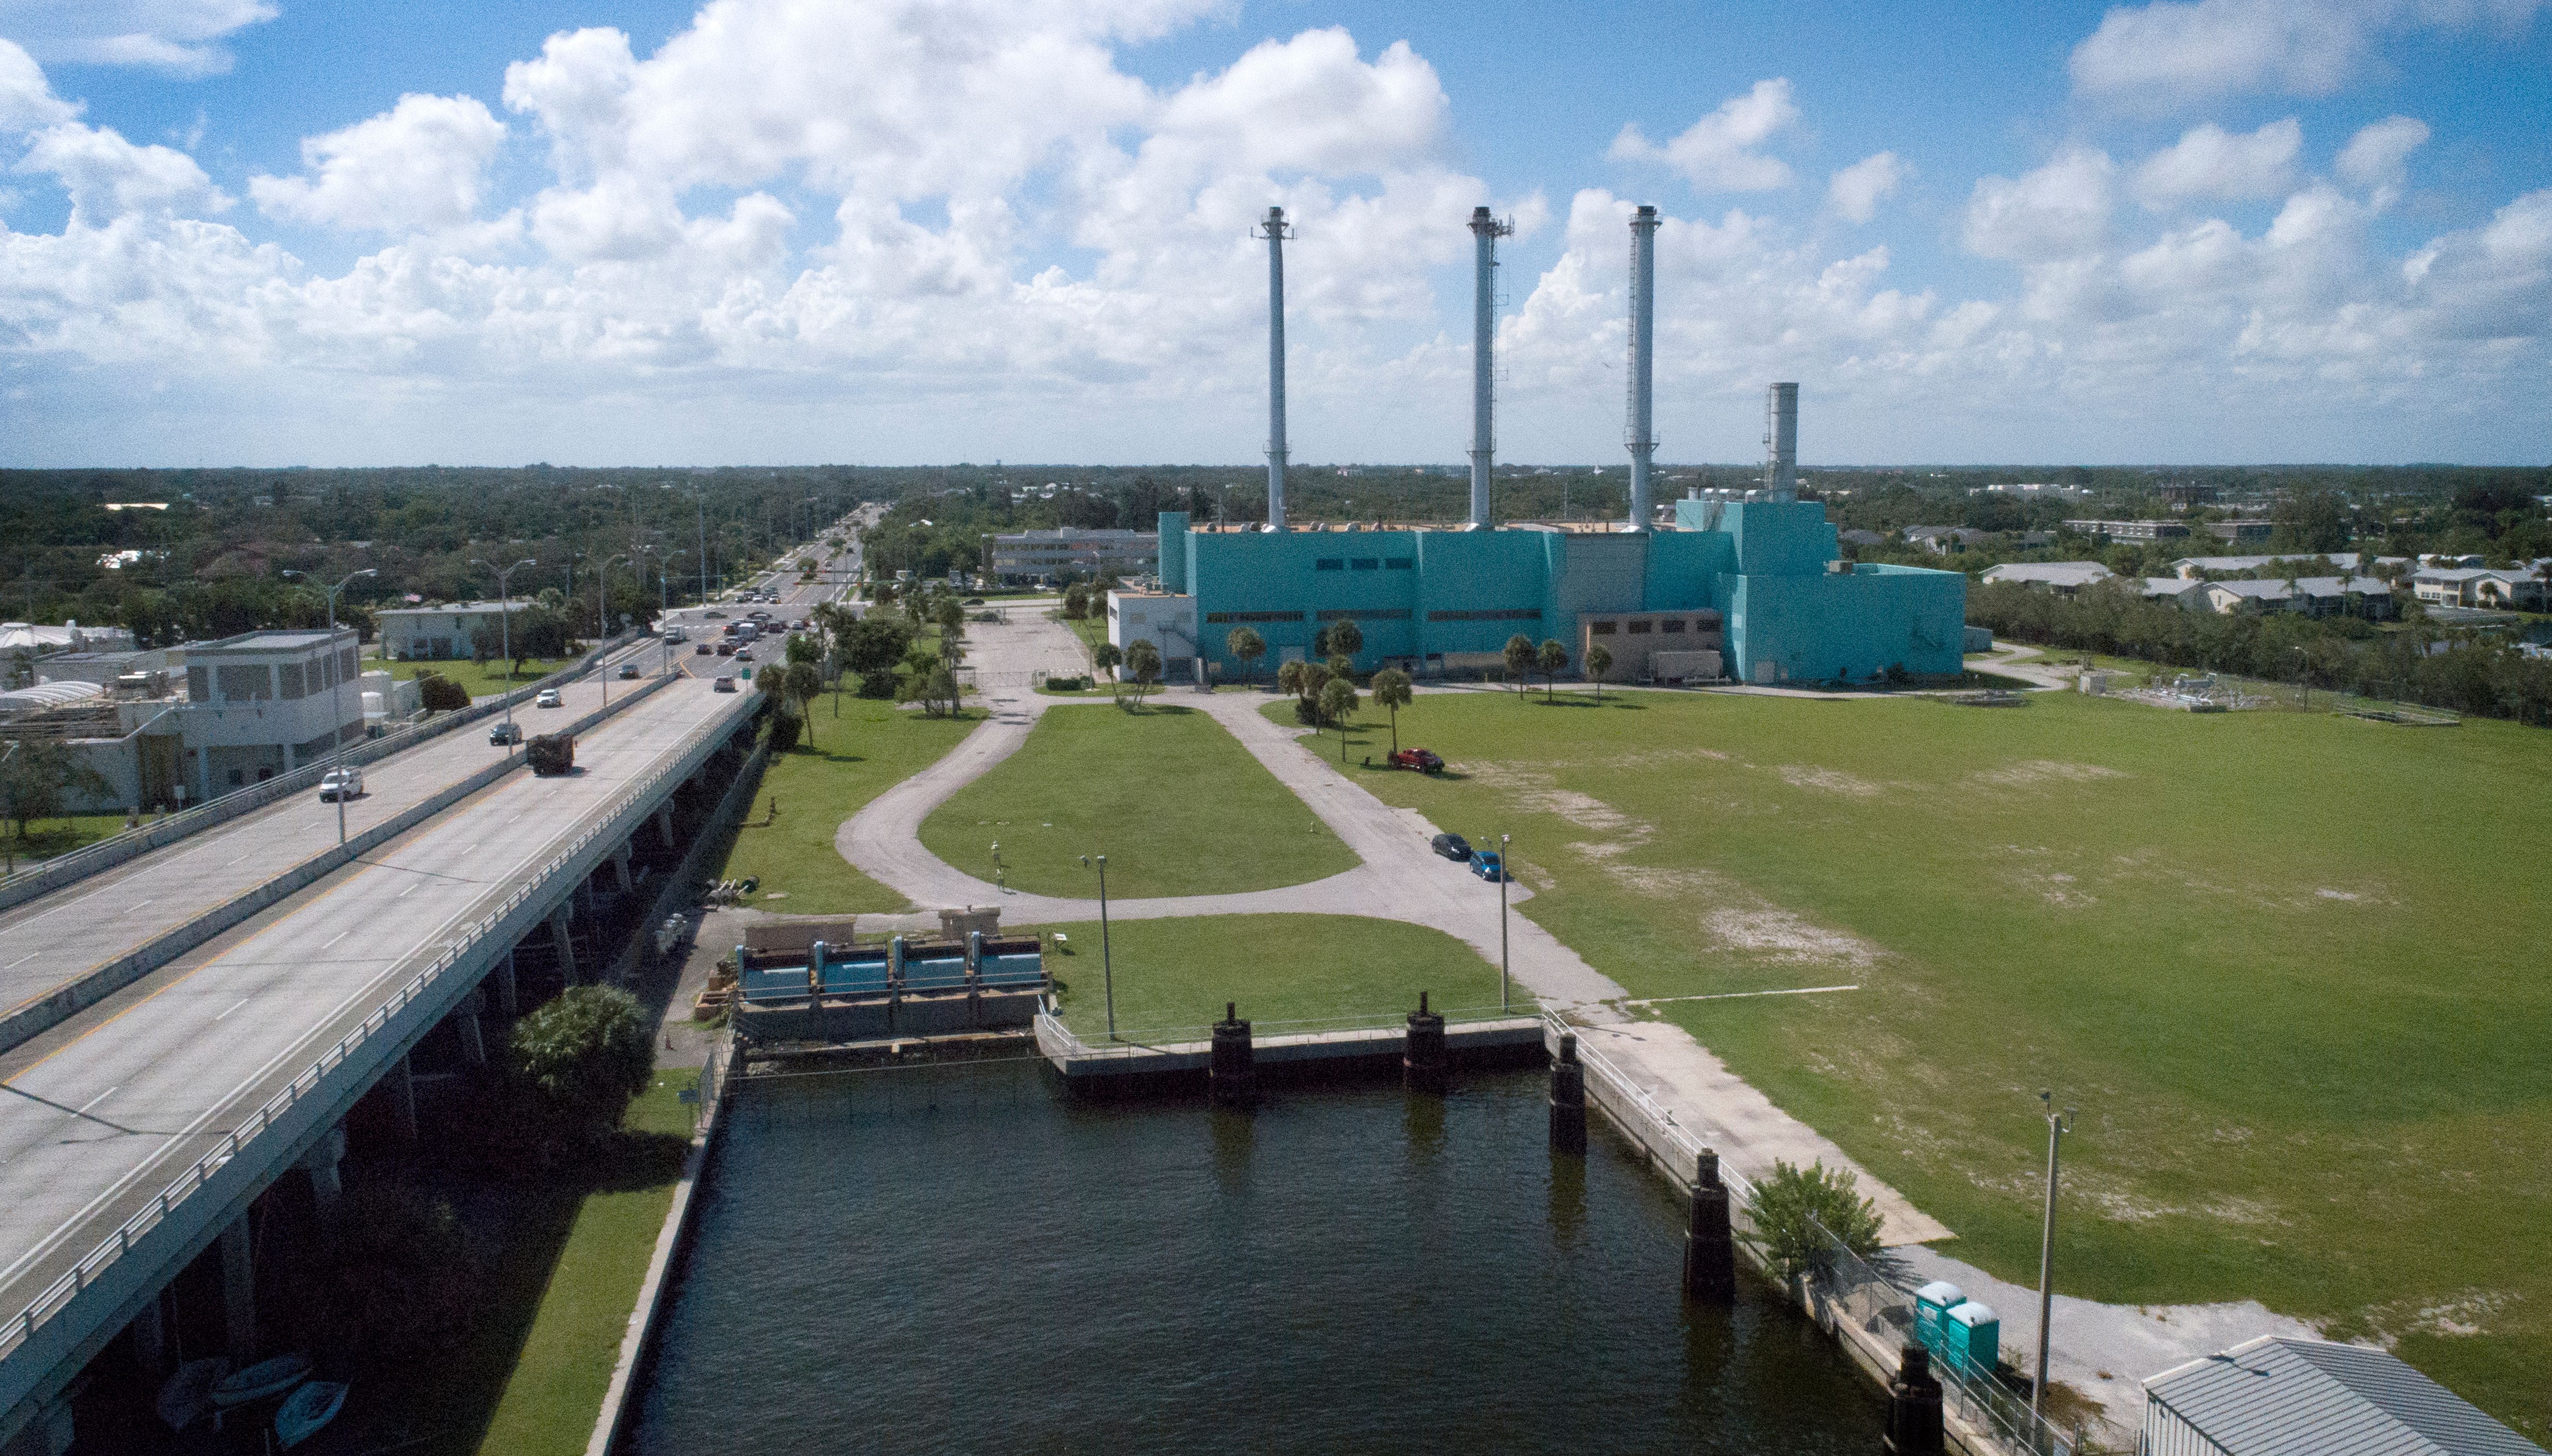 Vero Beach City Council to Consider Proposals for Future of Former Power Plant Site